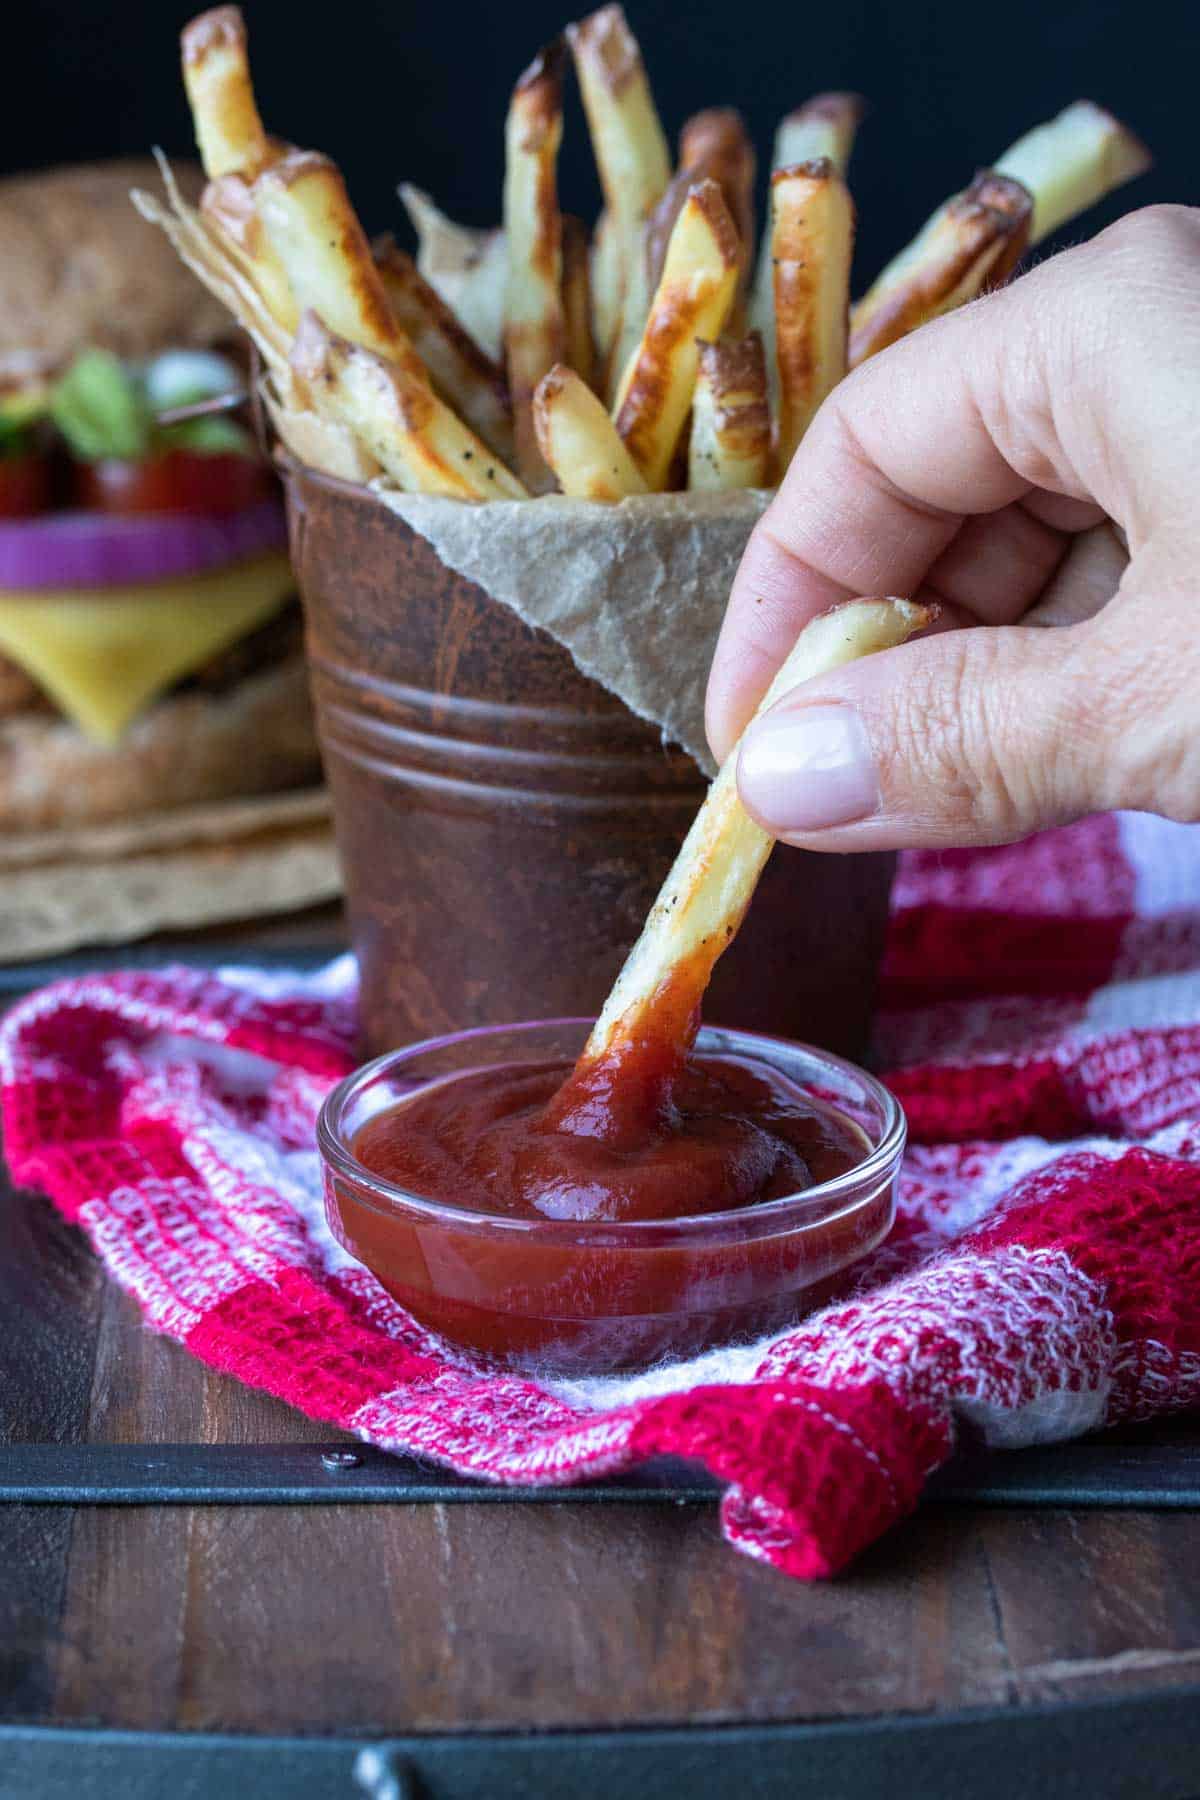 Hand dipping a french fry in a small glass bowl of ketchup